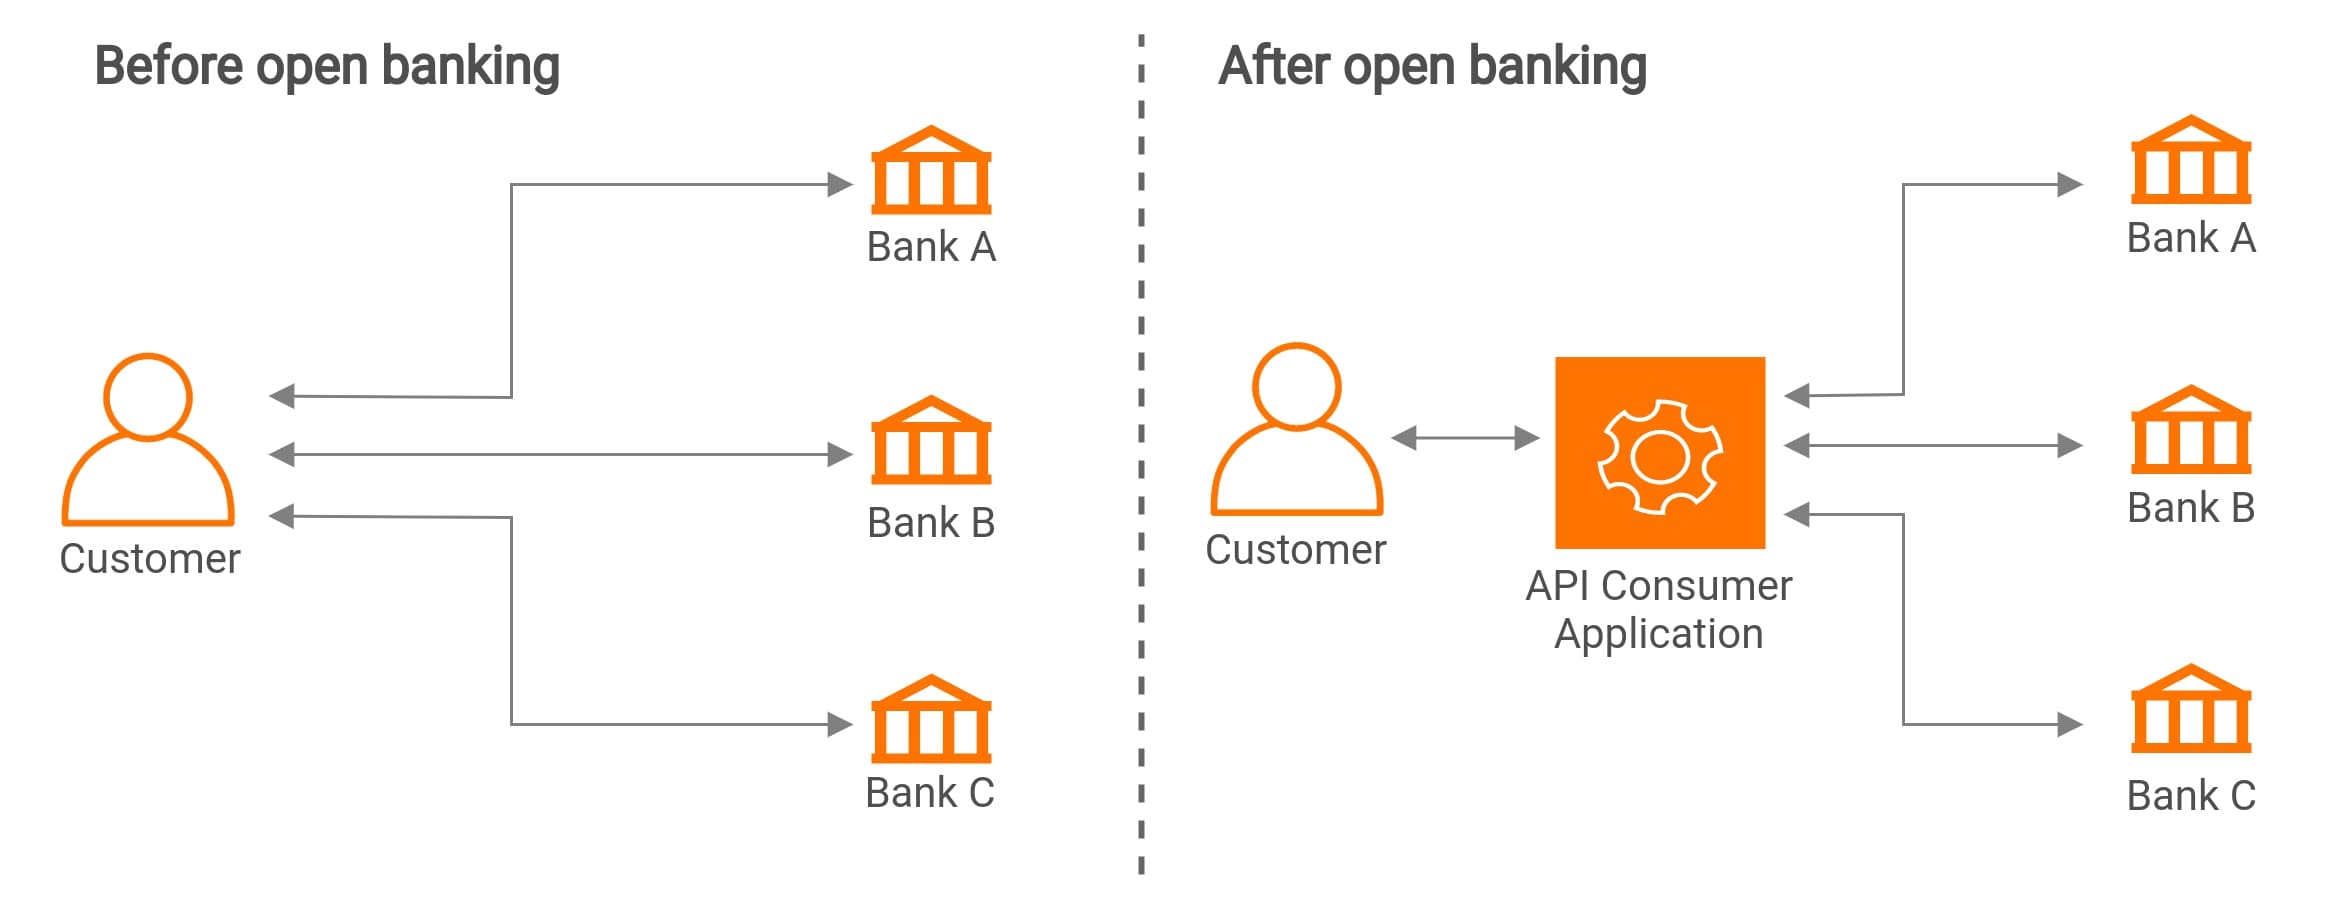 How does Open Banking work?